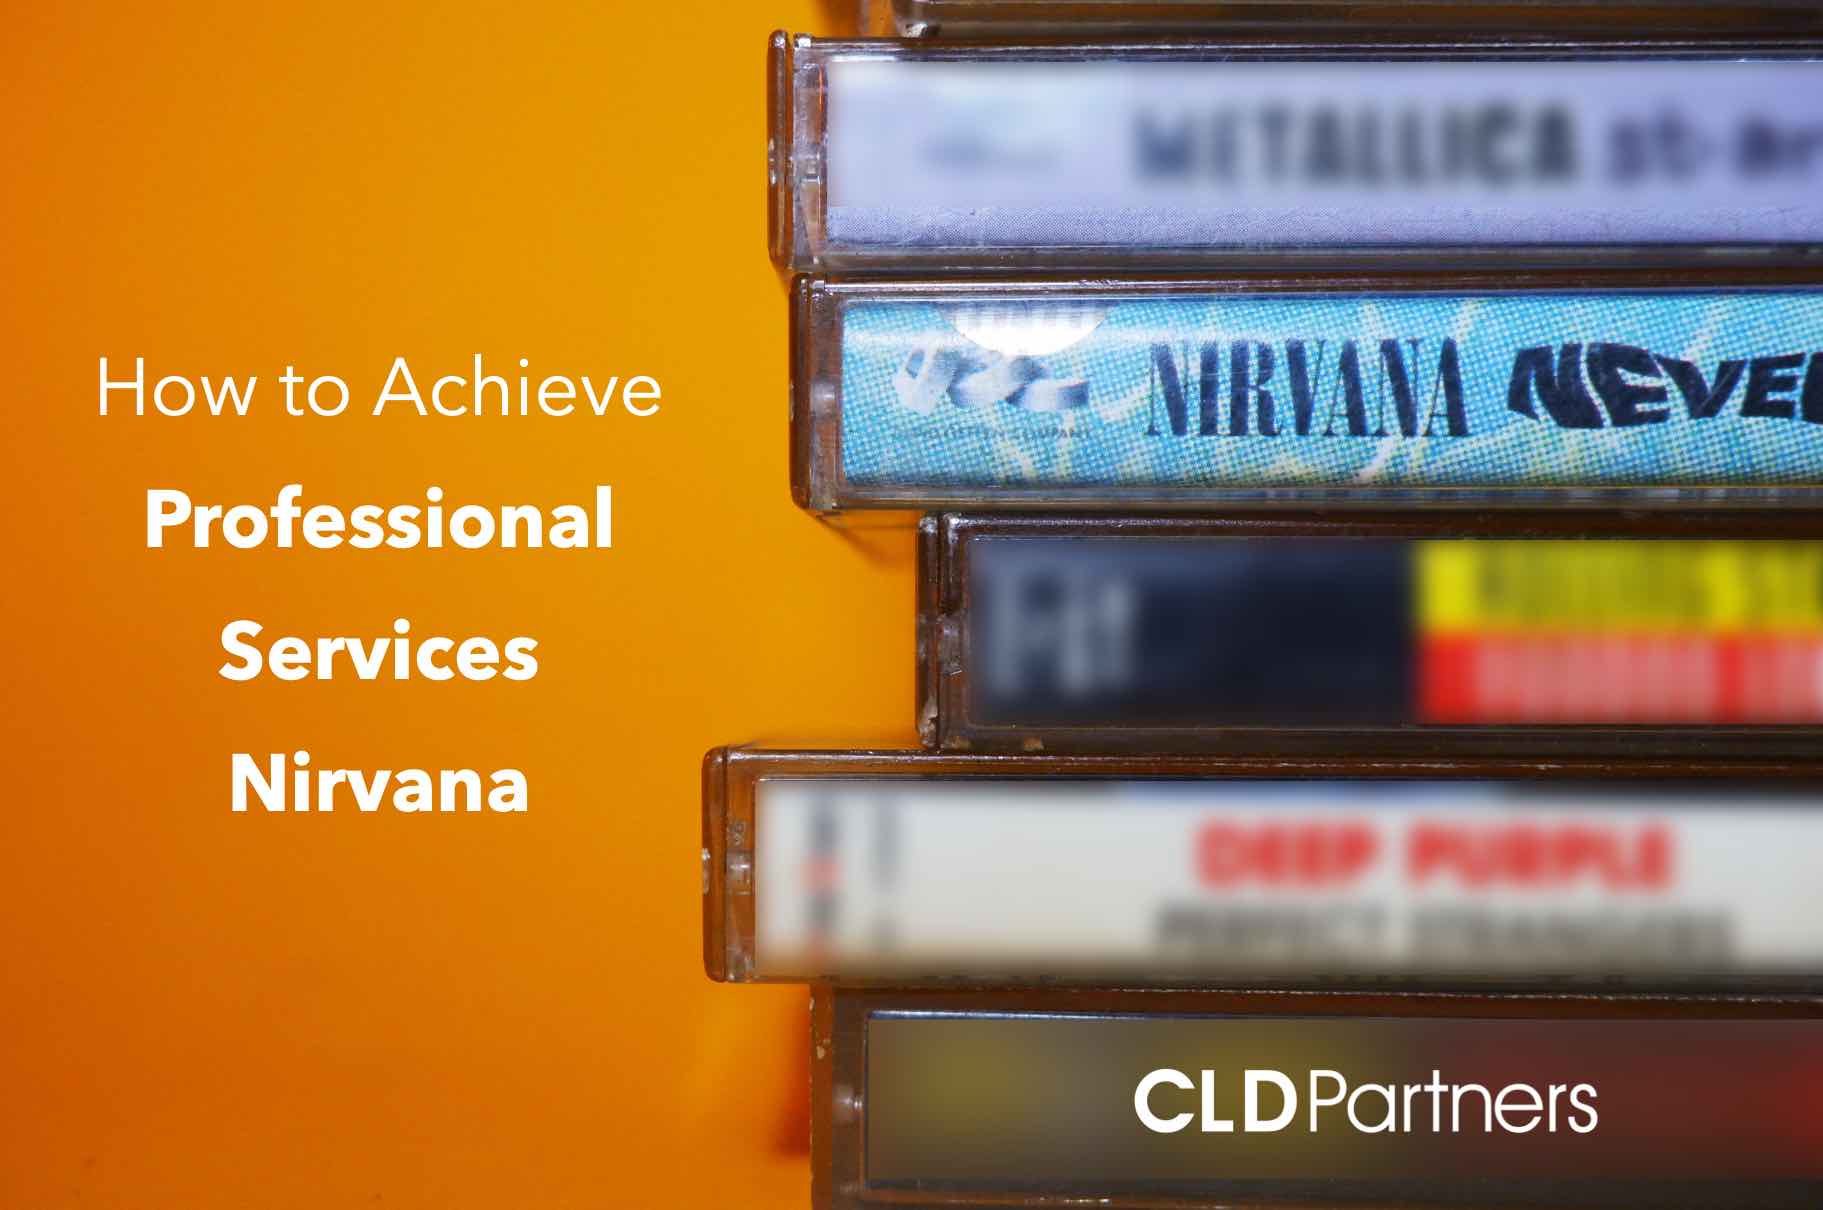 how to achieve Professional Services Nirvana with FinancialForce and CLD